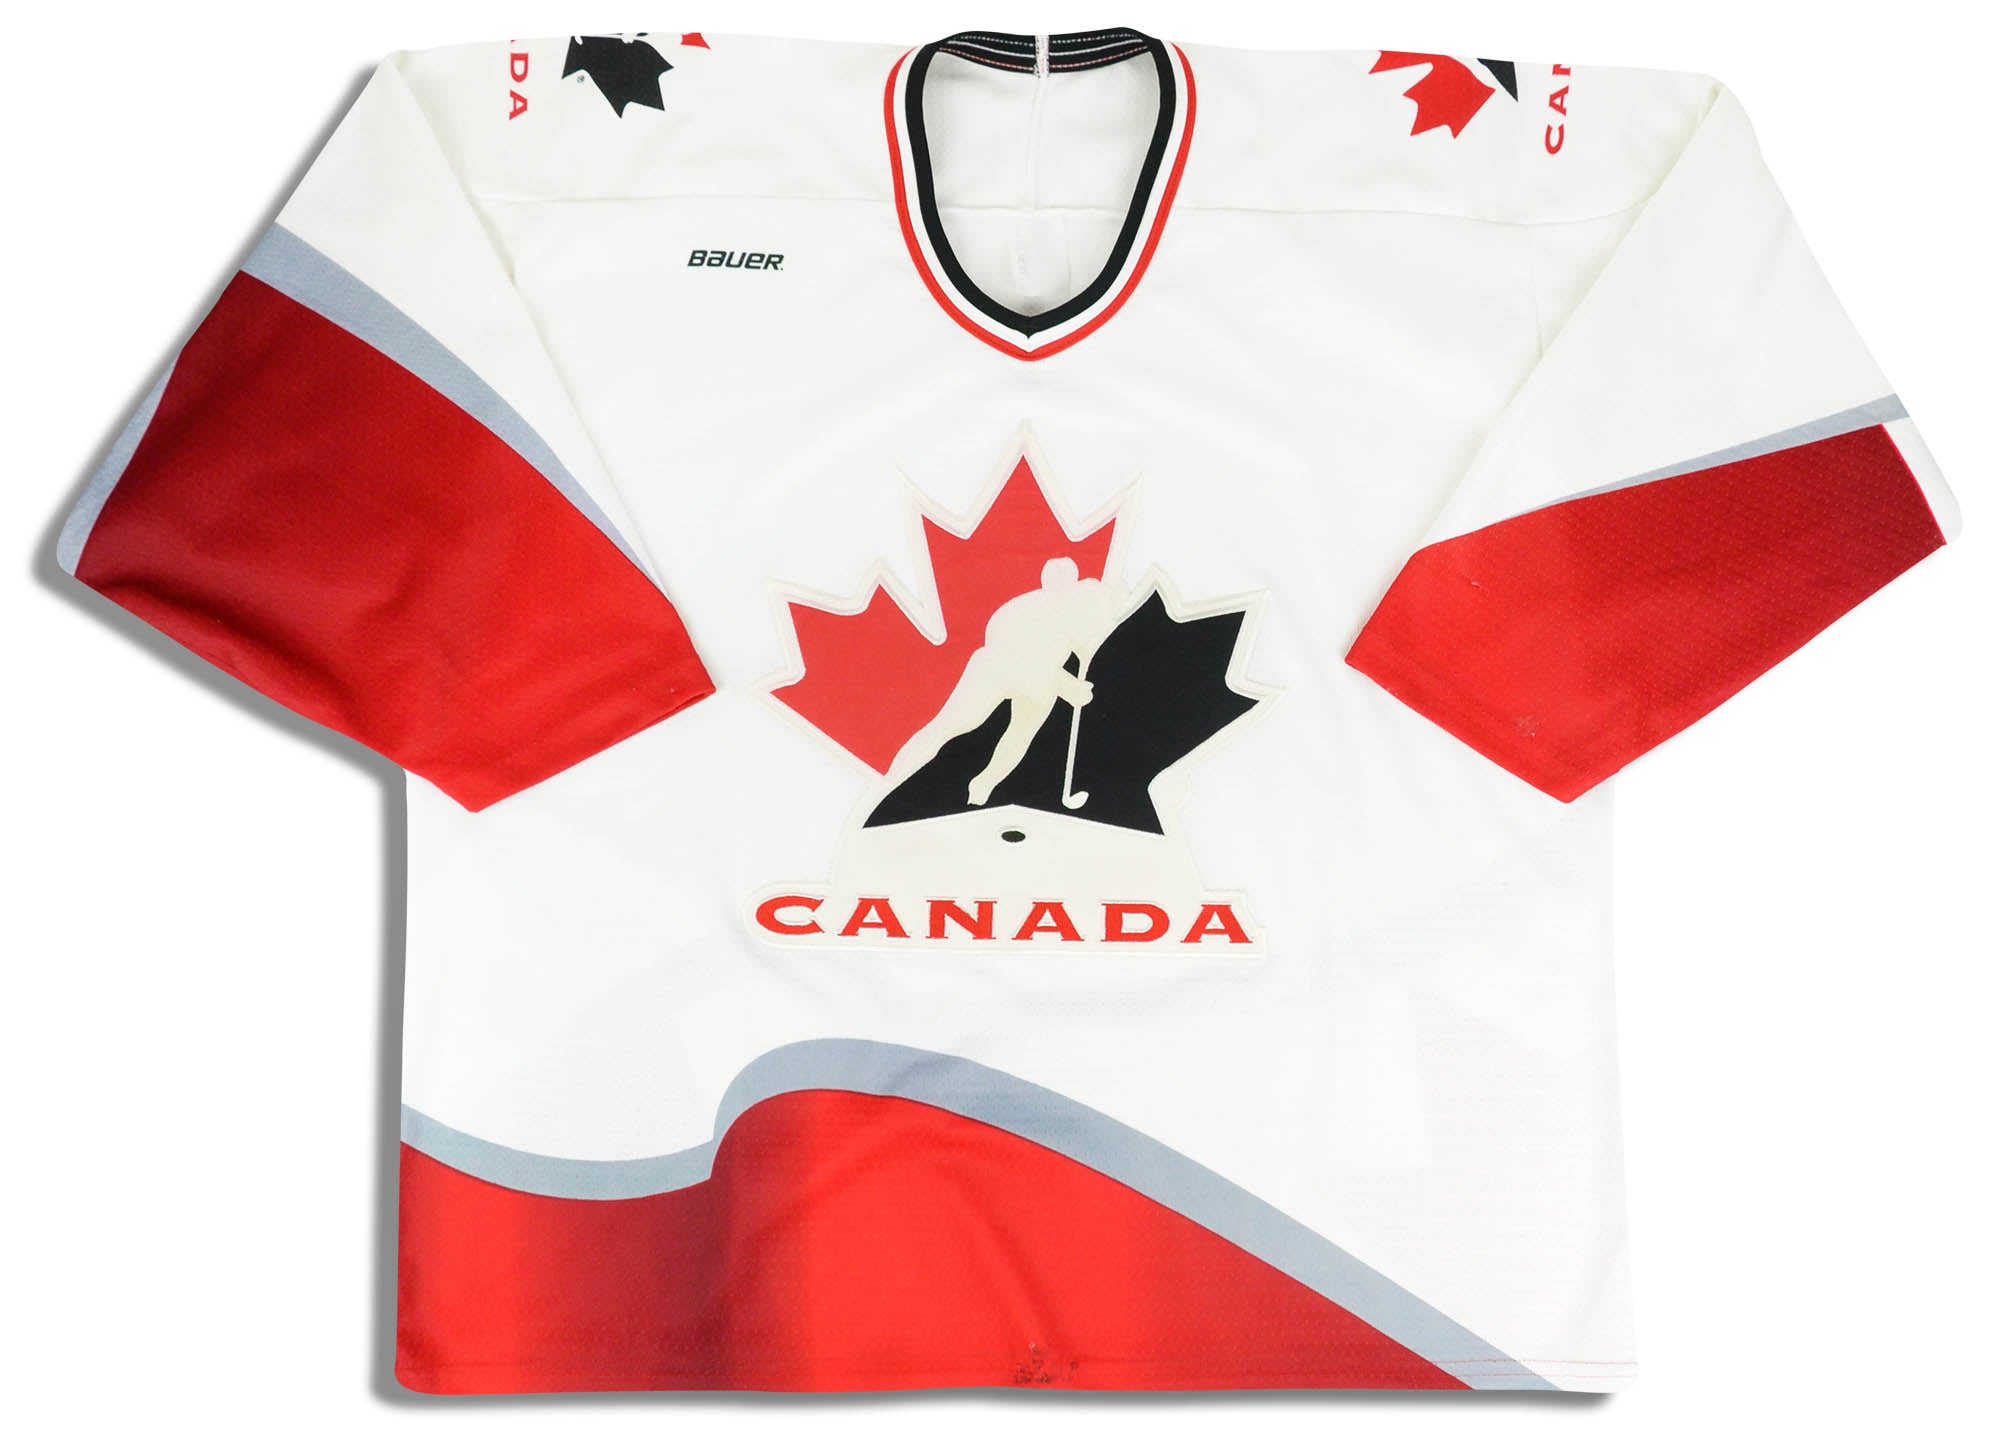 1996-98 CANADA NATIONAL HOCKEY TEAM BAUER JERSEY (HOME) XL - Classic  American Sports